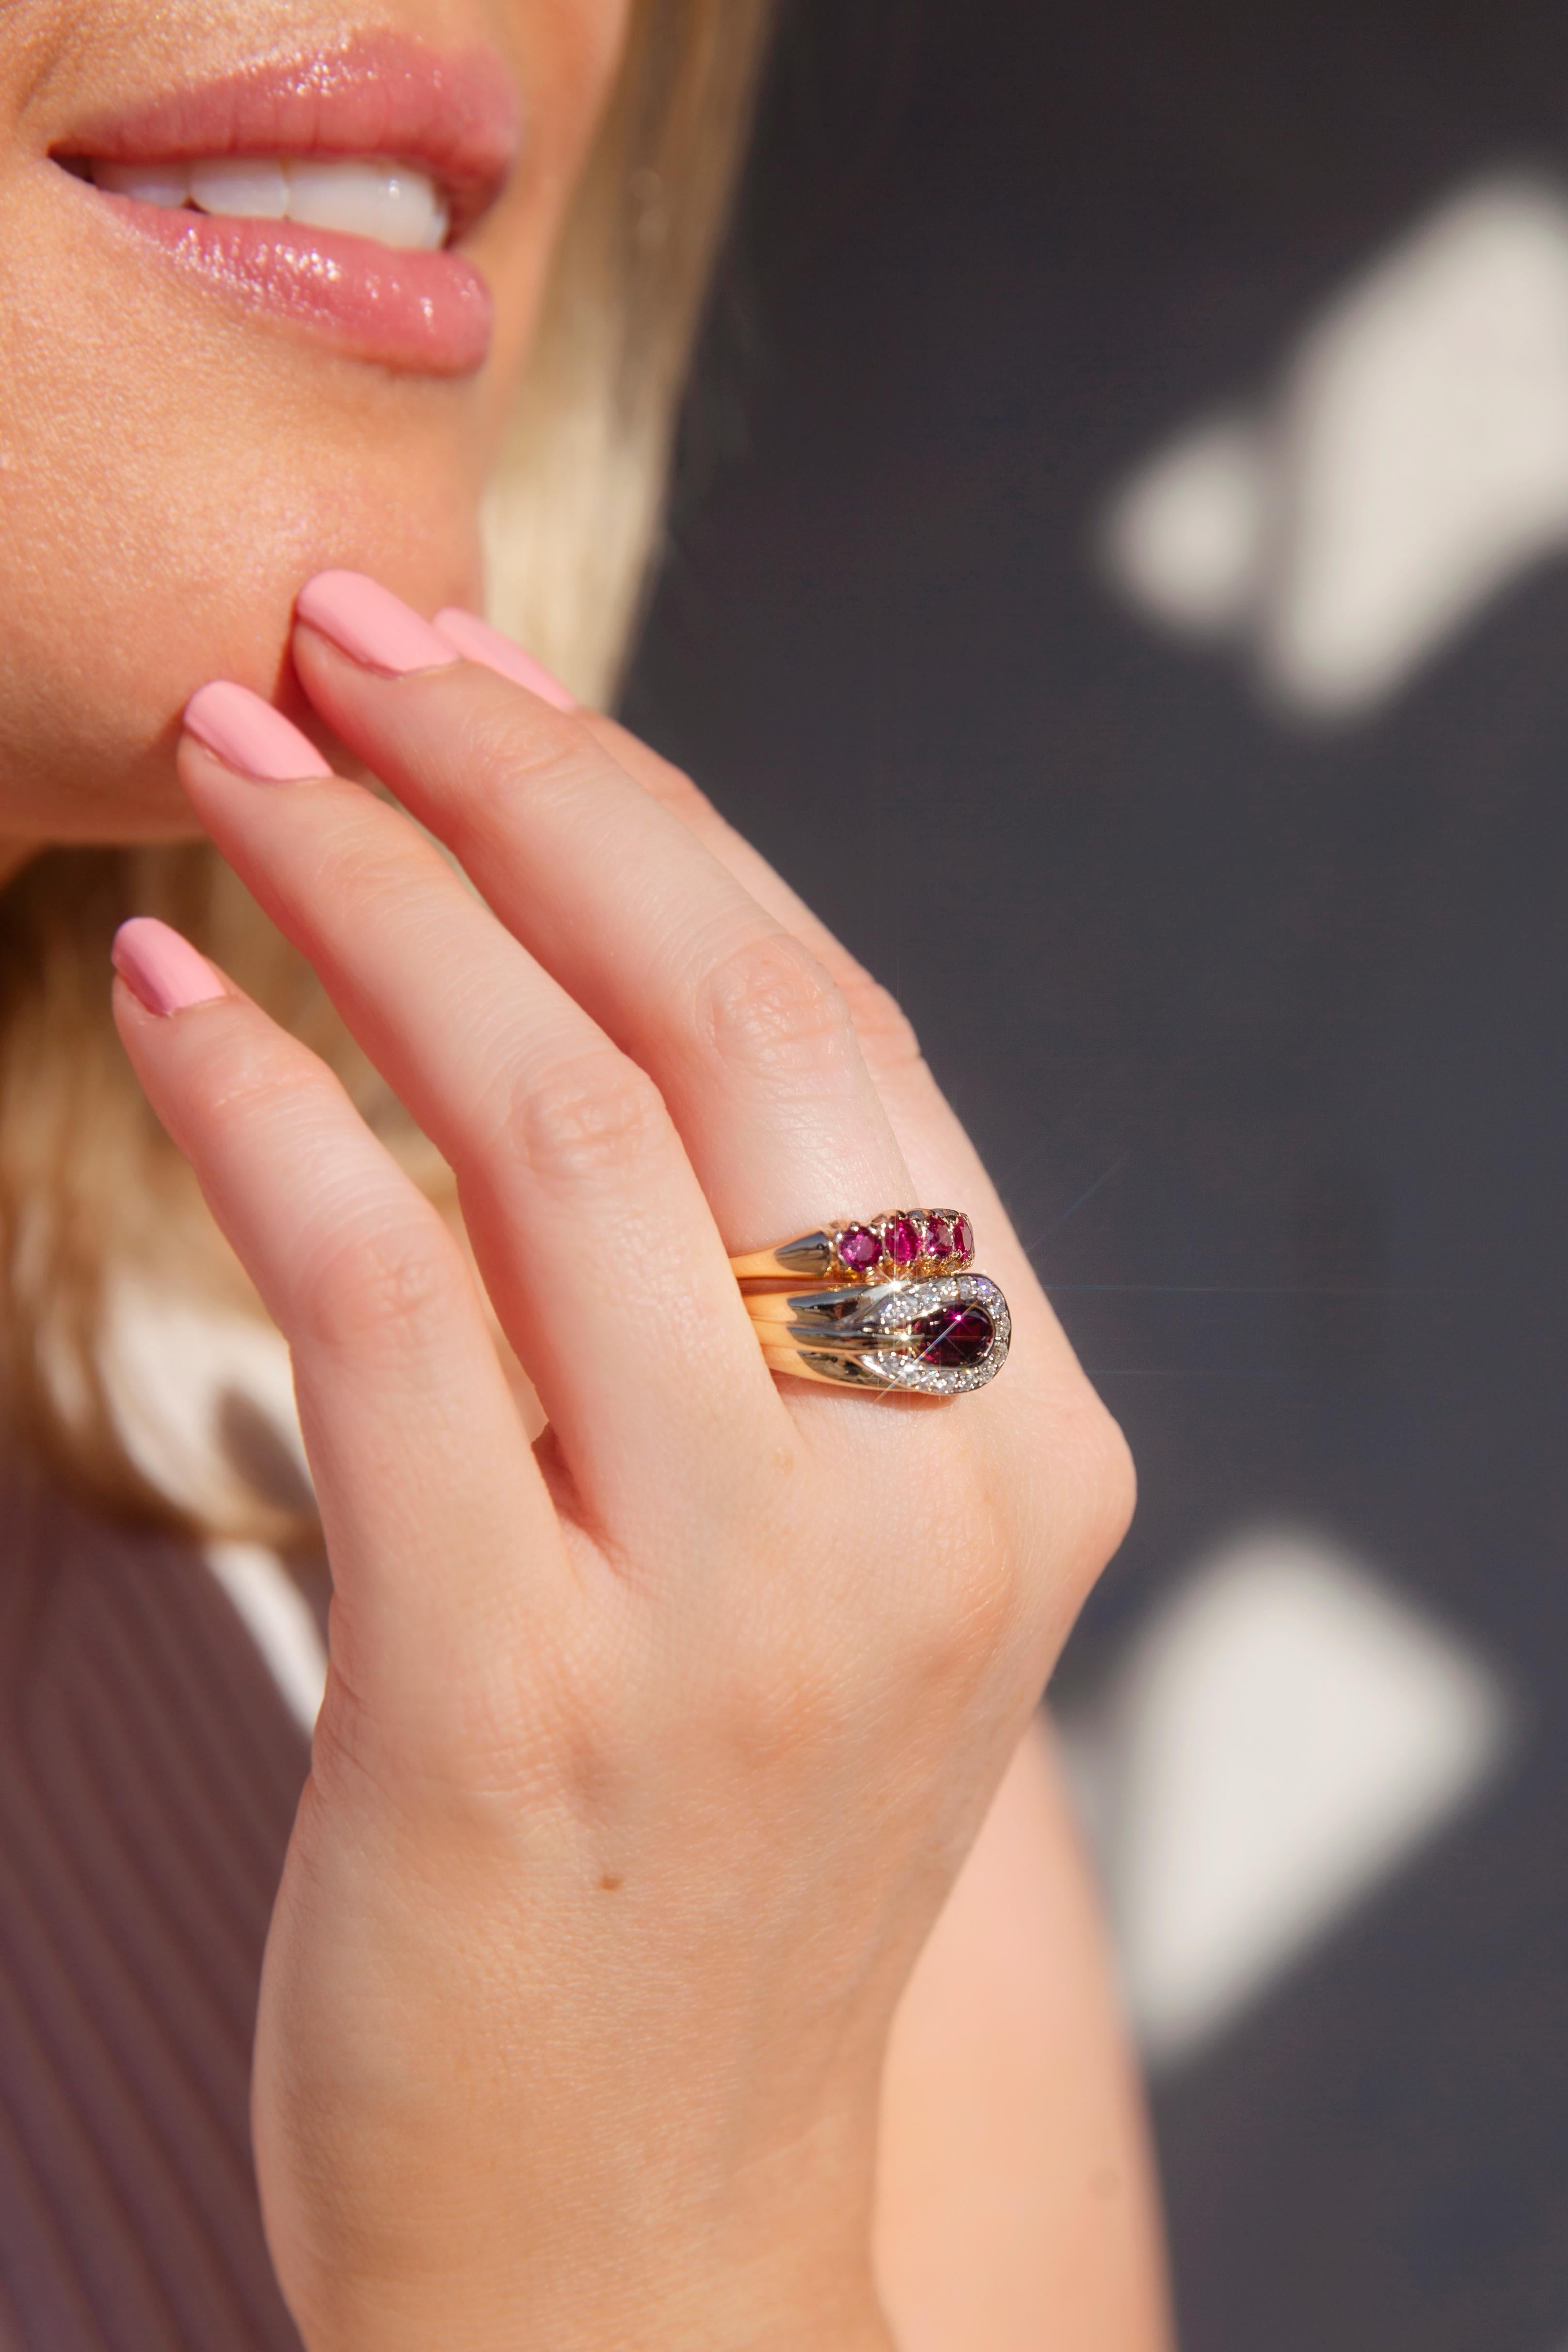 Lovingly crafted in 9 carat gold, The Lisa Ring, with her crimson natural rubies across a London Bridge setting, is a beautiful vintage jewel. Symbolising passion, she is a perfect gift for your beloved.

The Lisa Ring Gem Details
The faceted round